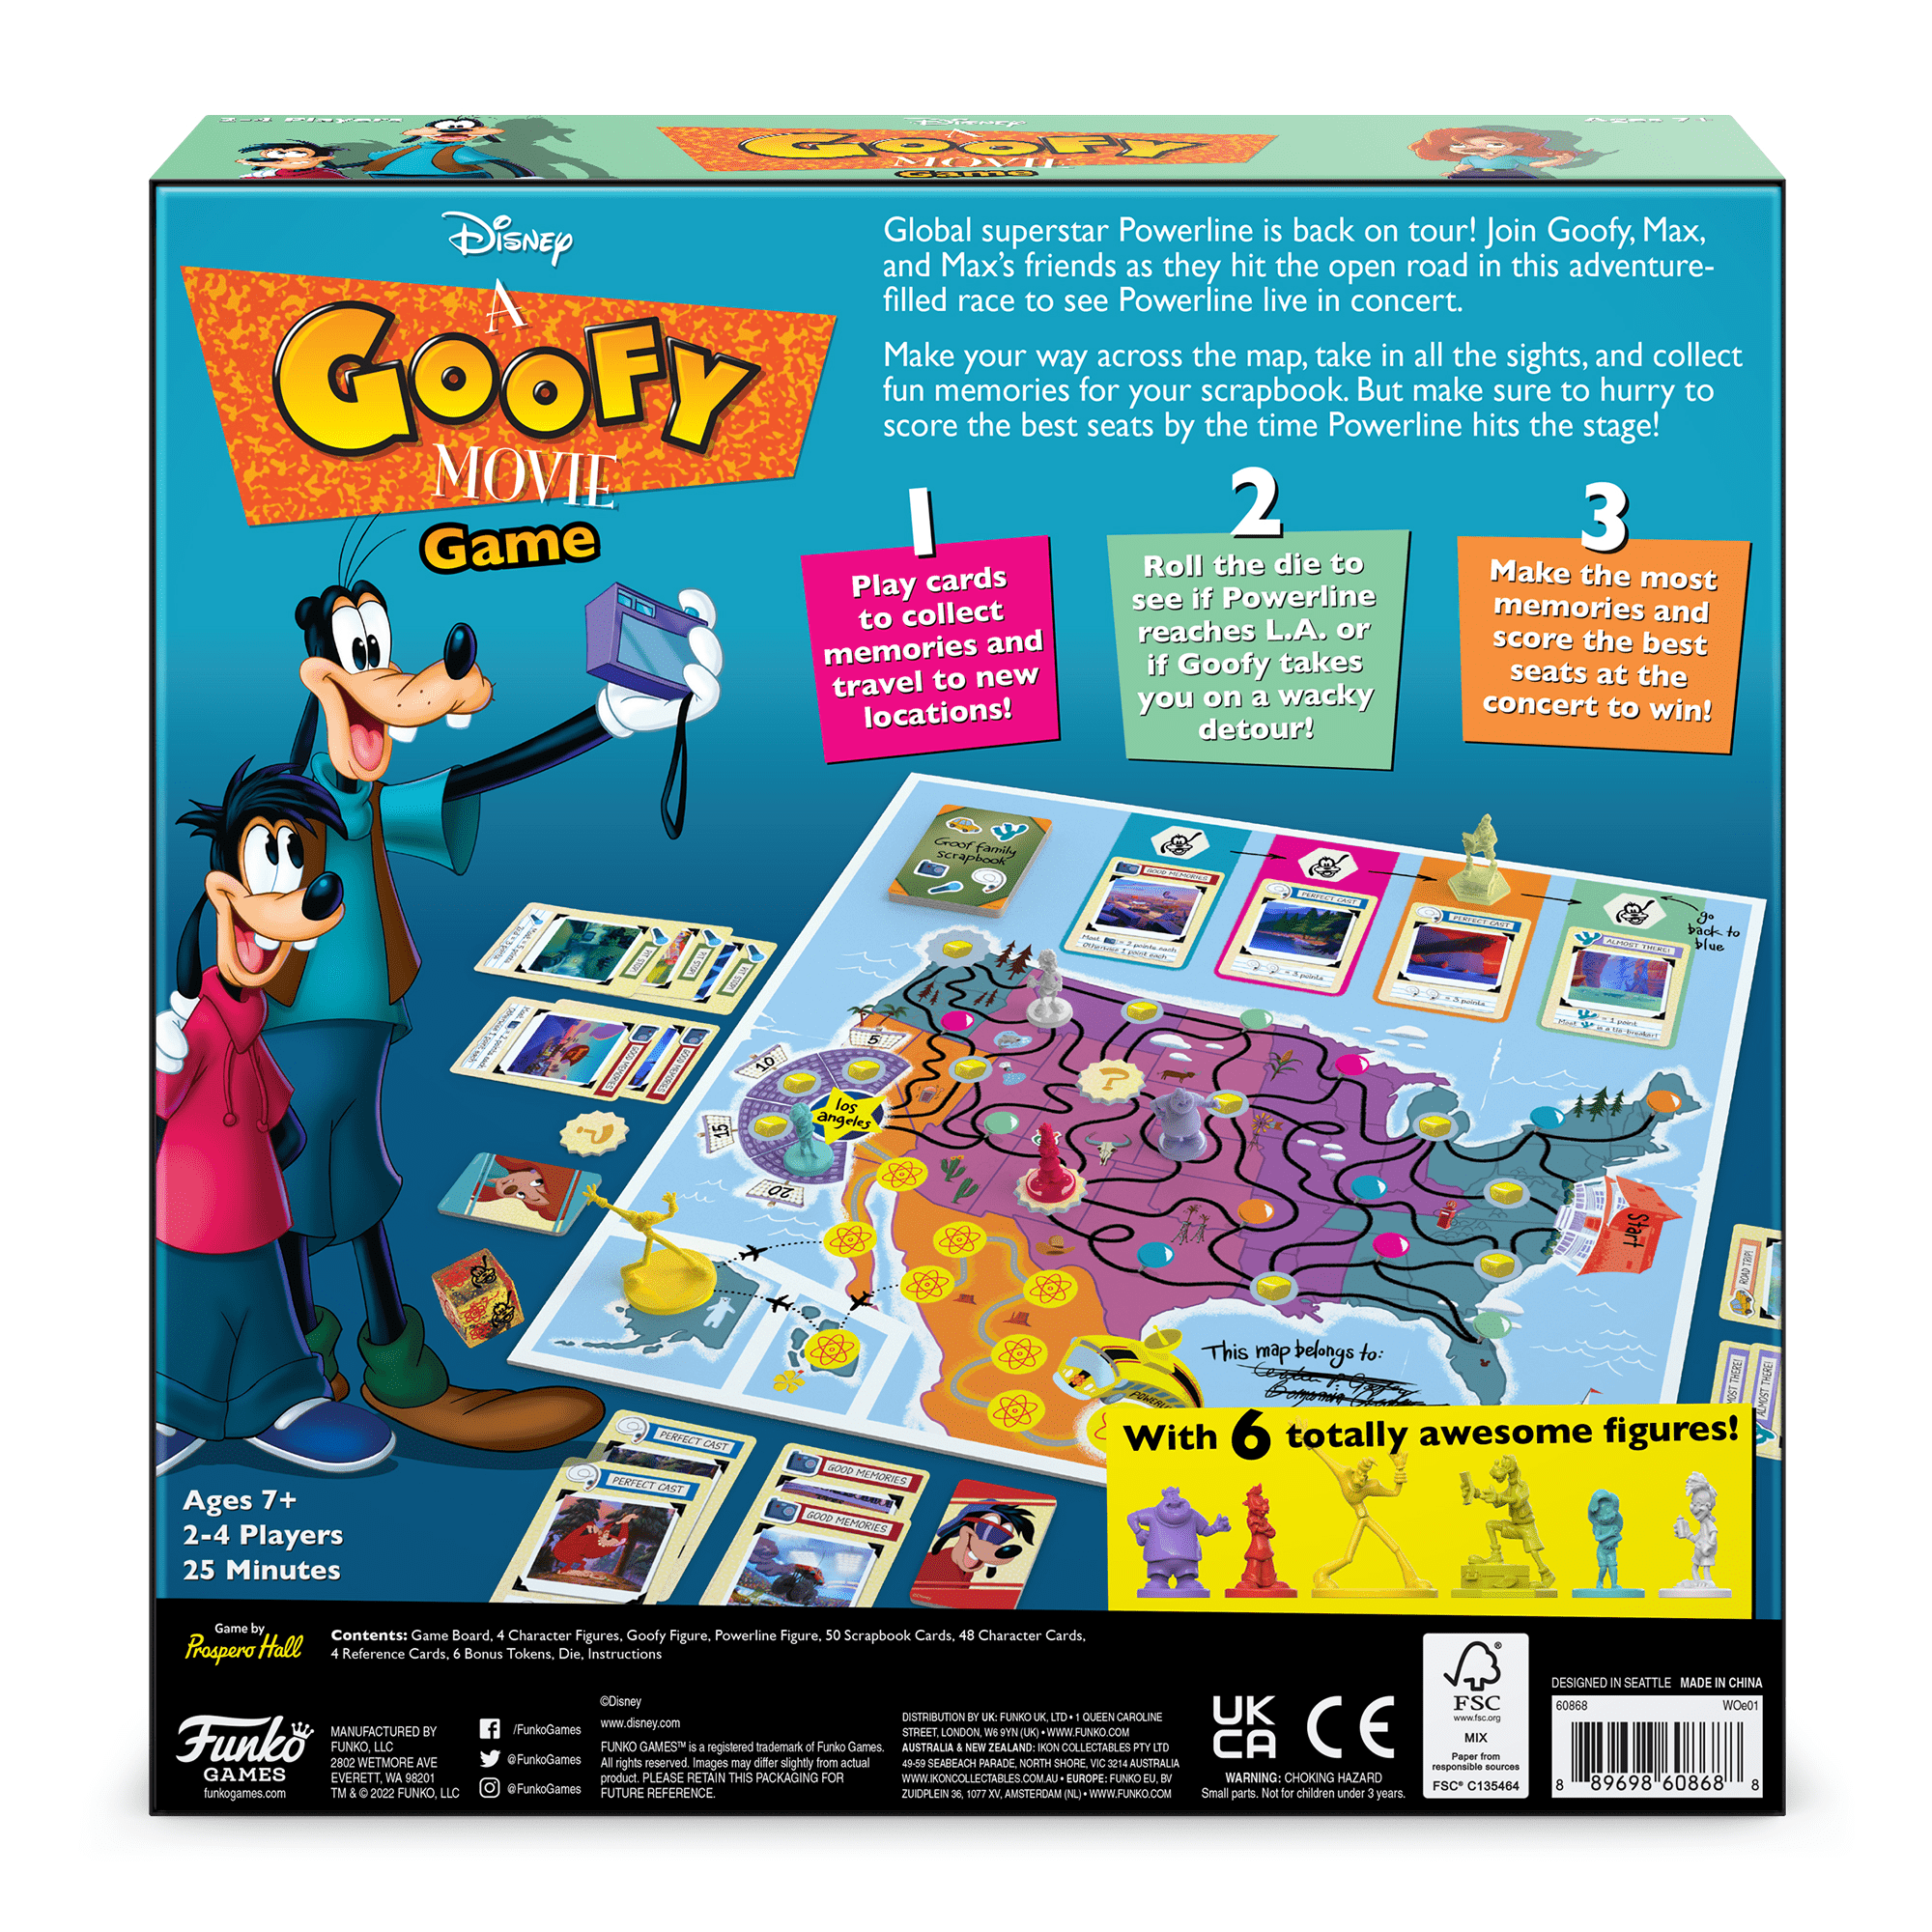 A Goofy Movie Game back of box